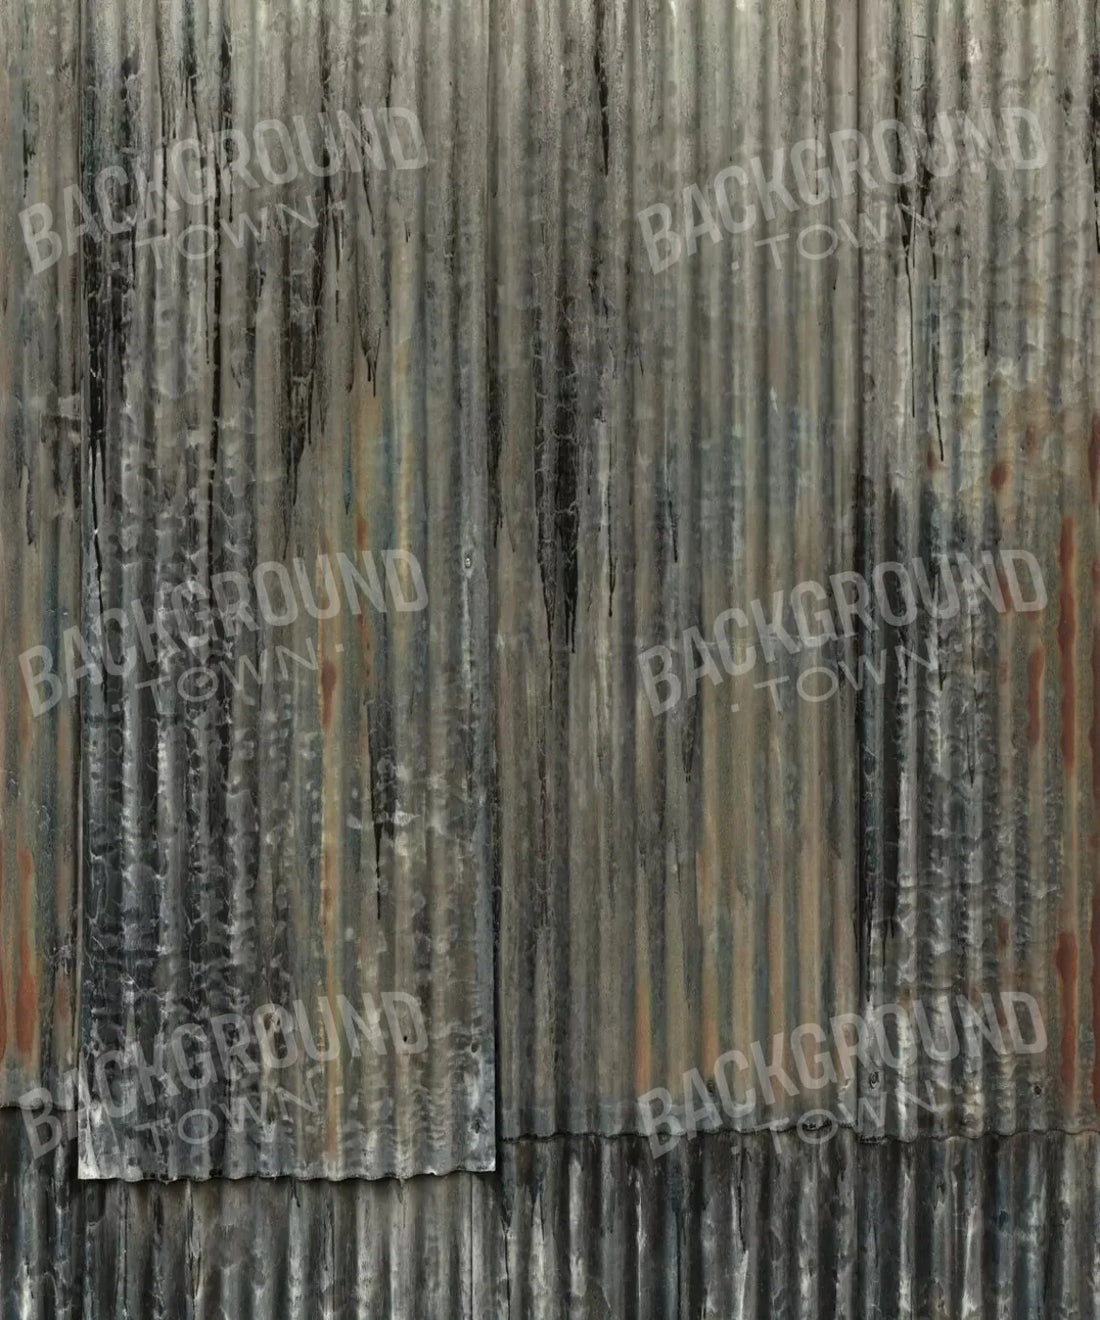  Steel and Metal Backdrop for Photography